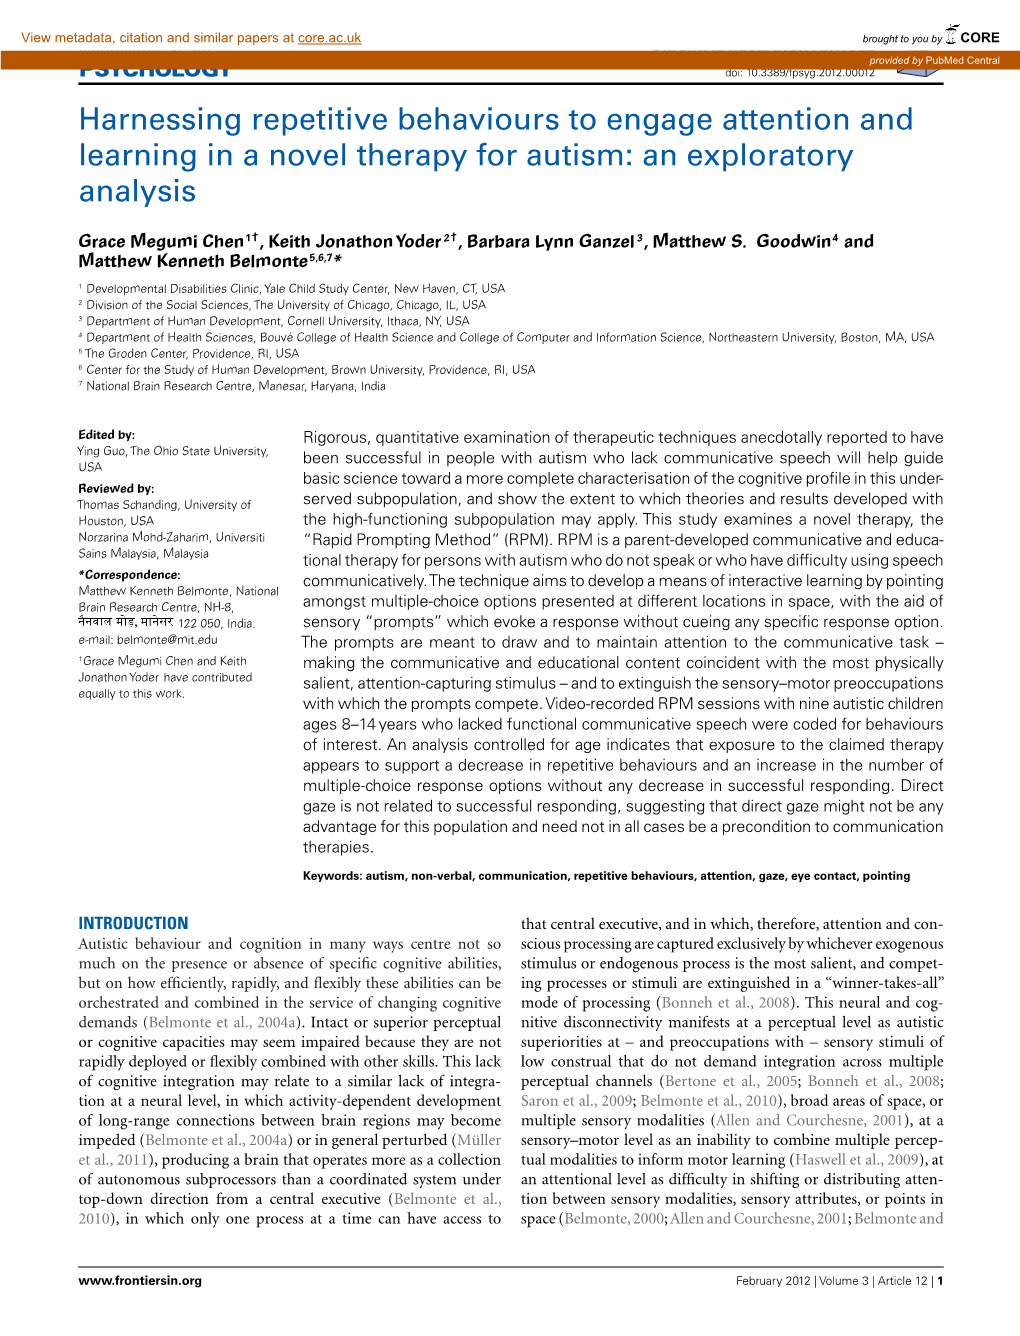 Harnessing Repetitive Behaviours to Engage Attention and Learning in a Novel Therapy for Autism: an Exploratory Analysis